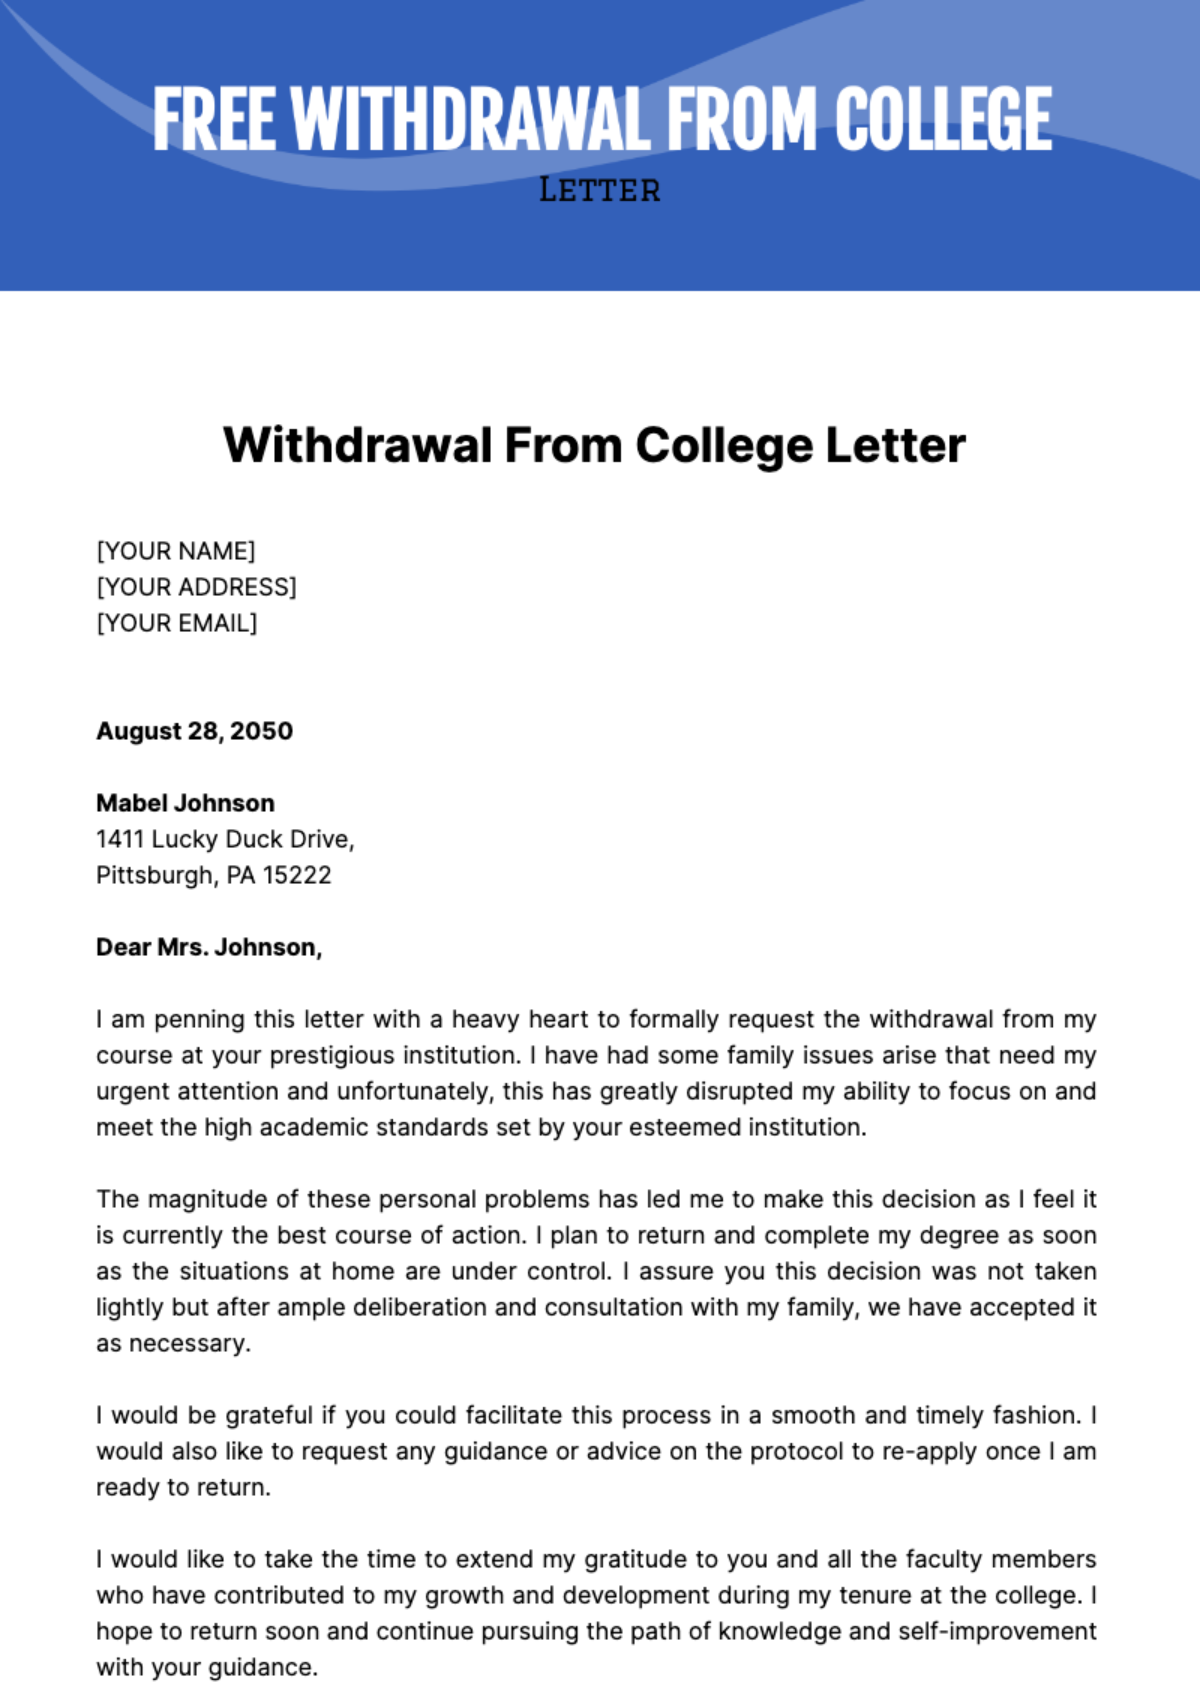 Free Withdrawal from College Letter Template